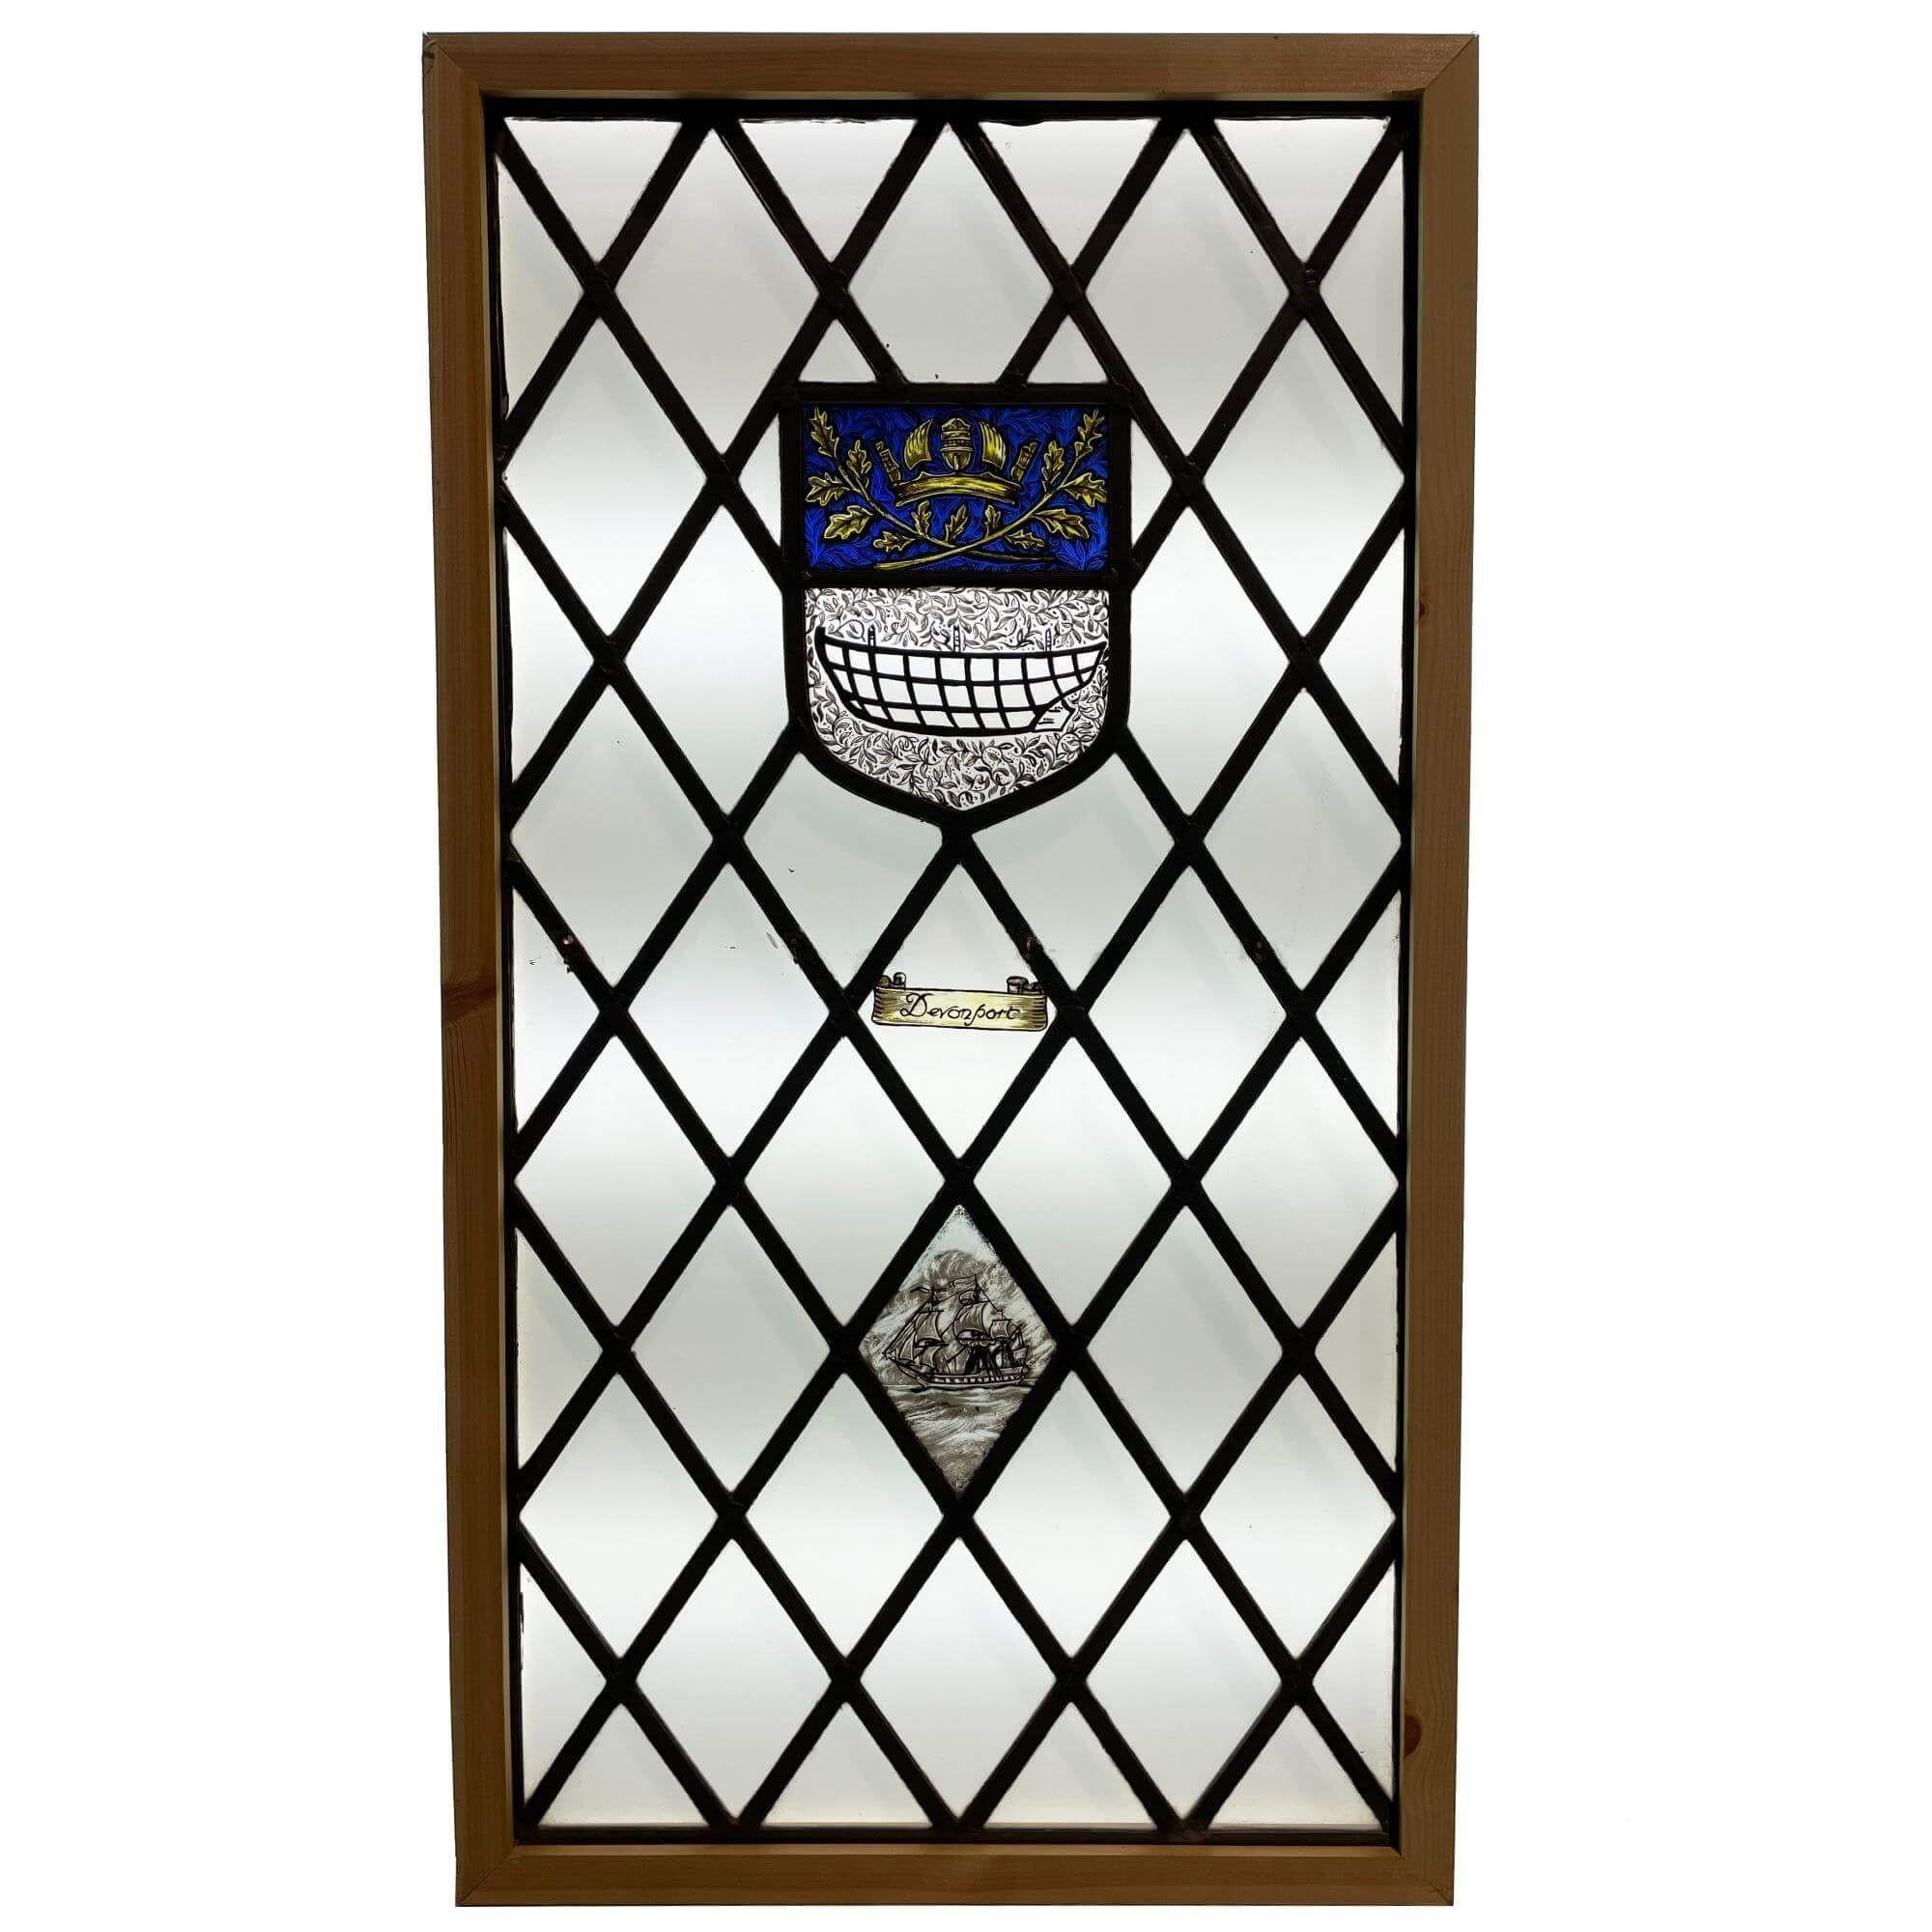 English ‘Devonport’ Antique Stained Glass Window For Sale